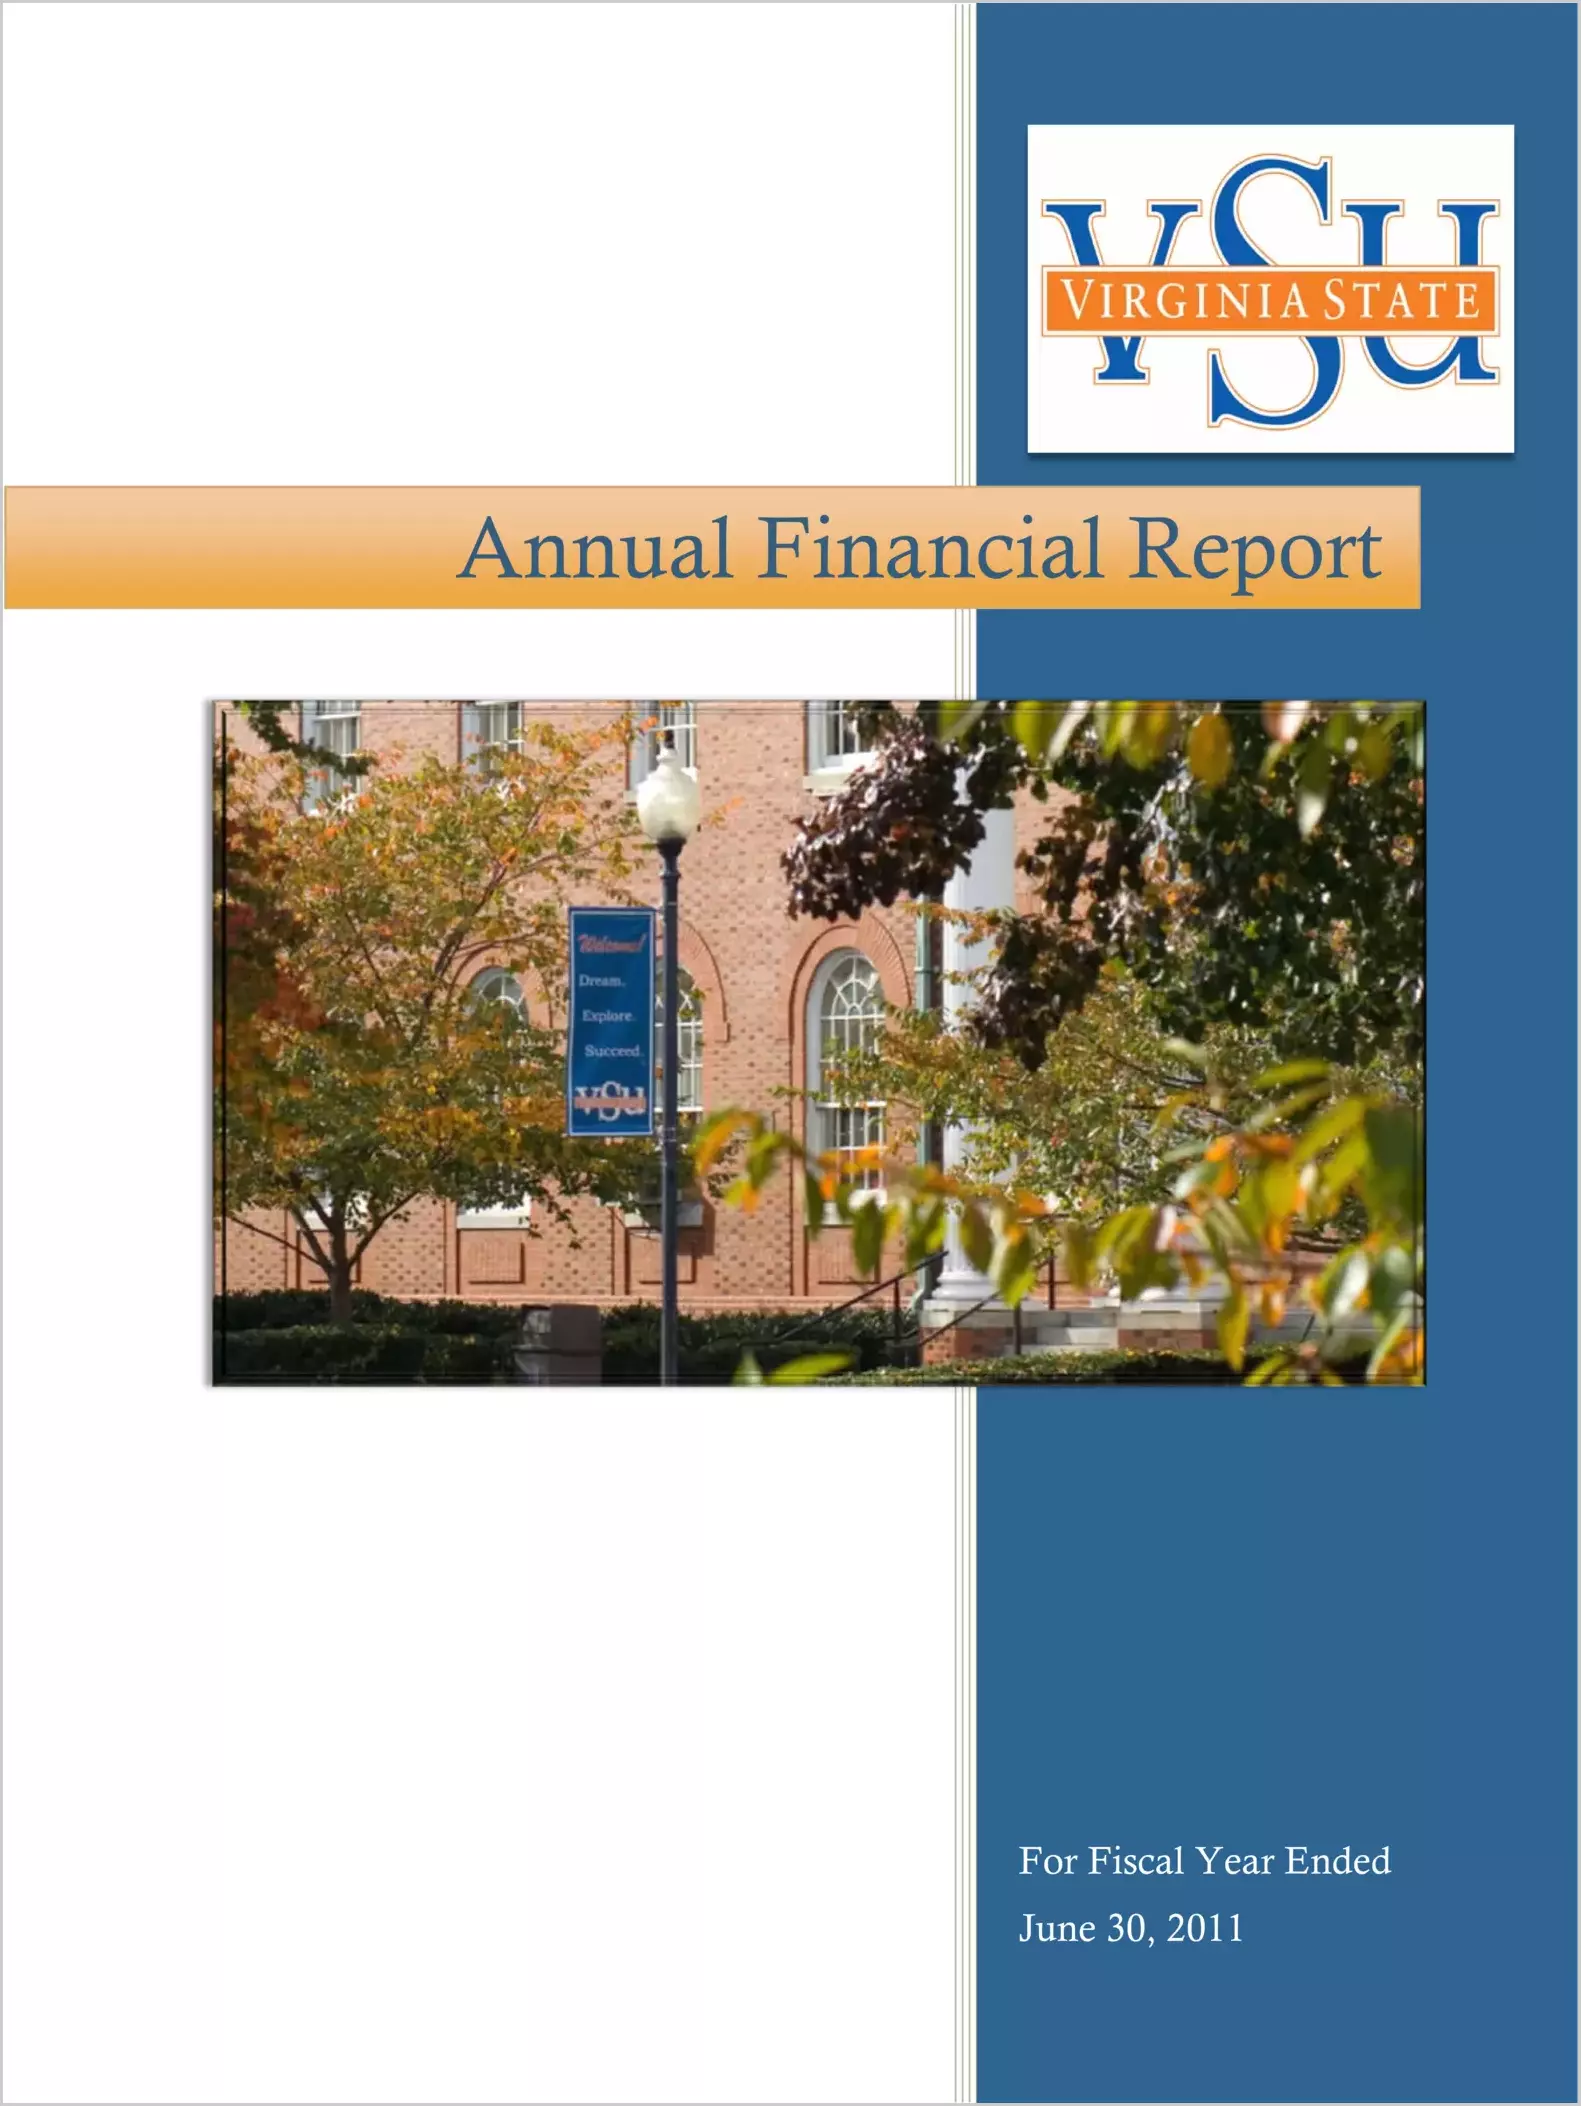 Virginia State University Financial Statement report for the year ended June 30, 2011